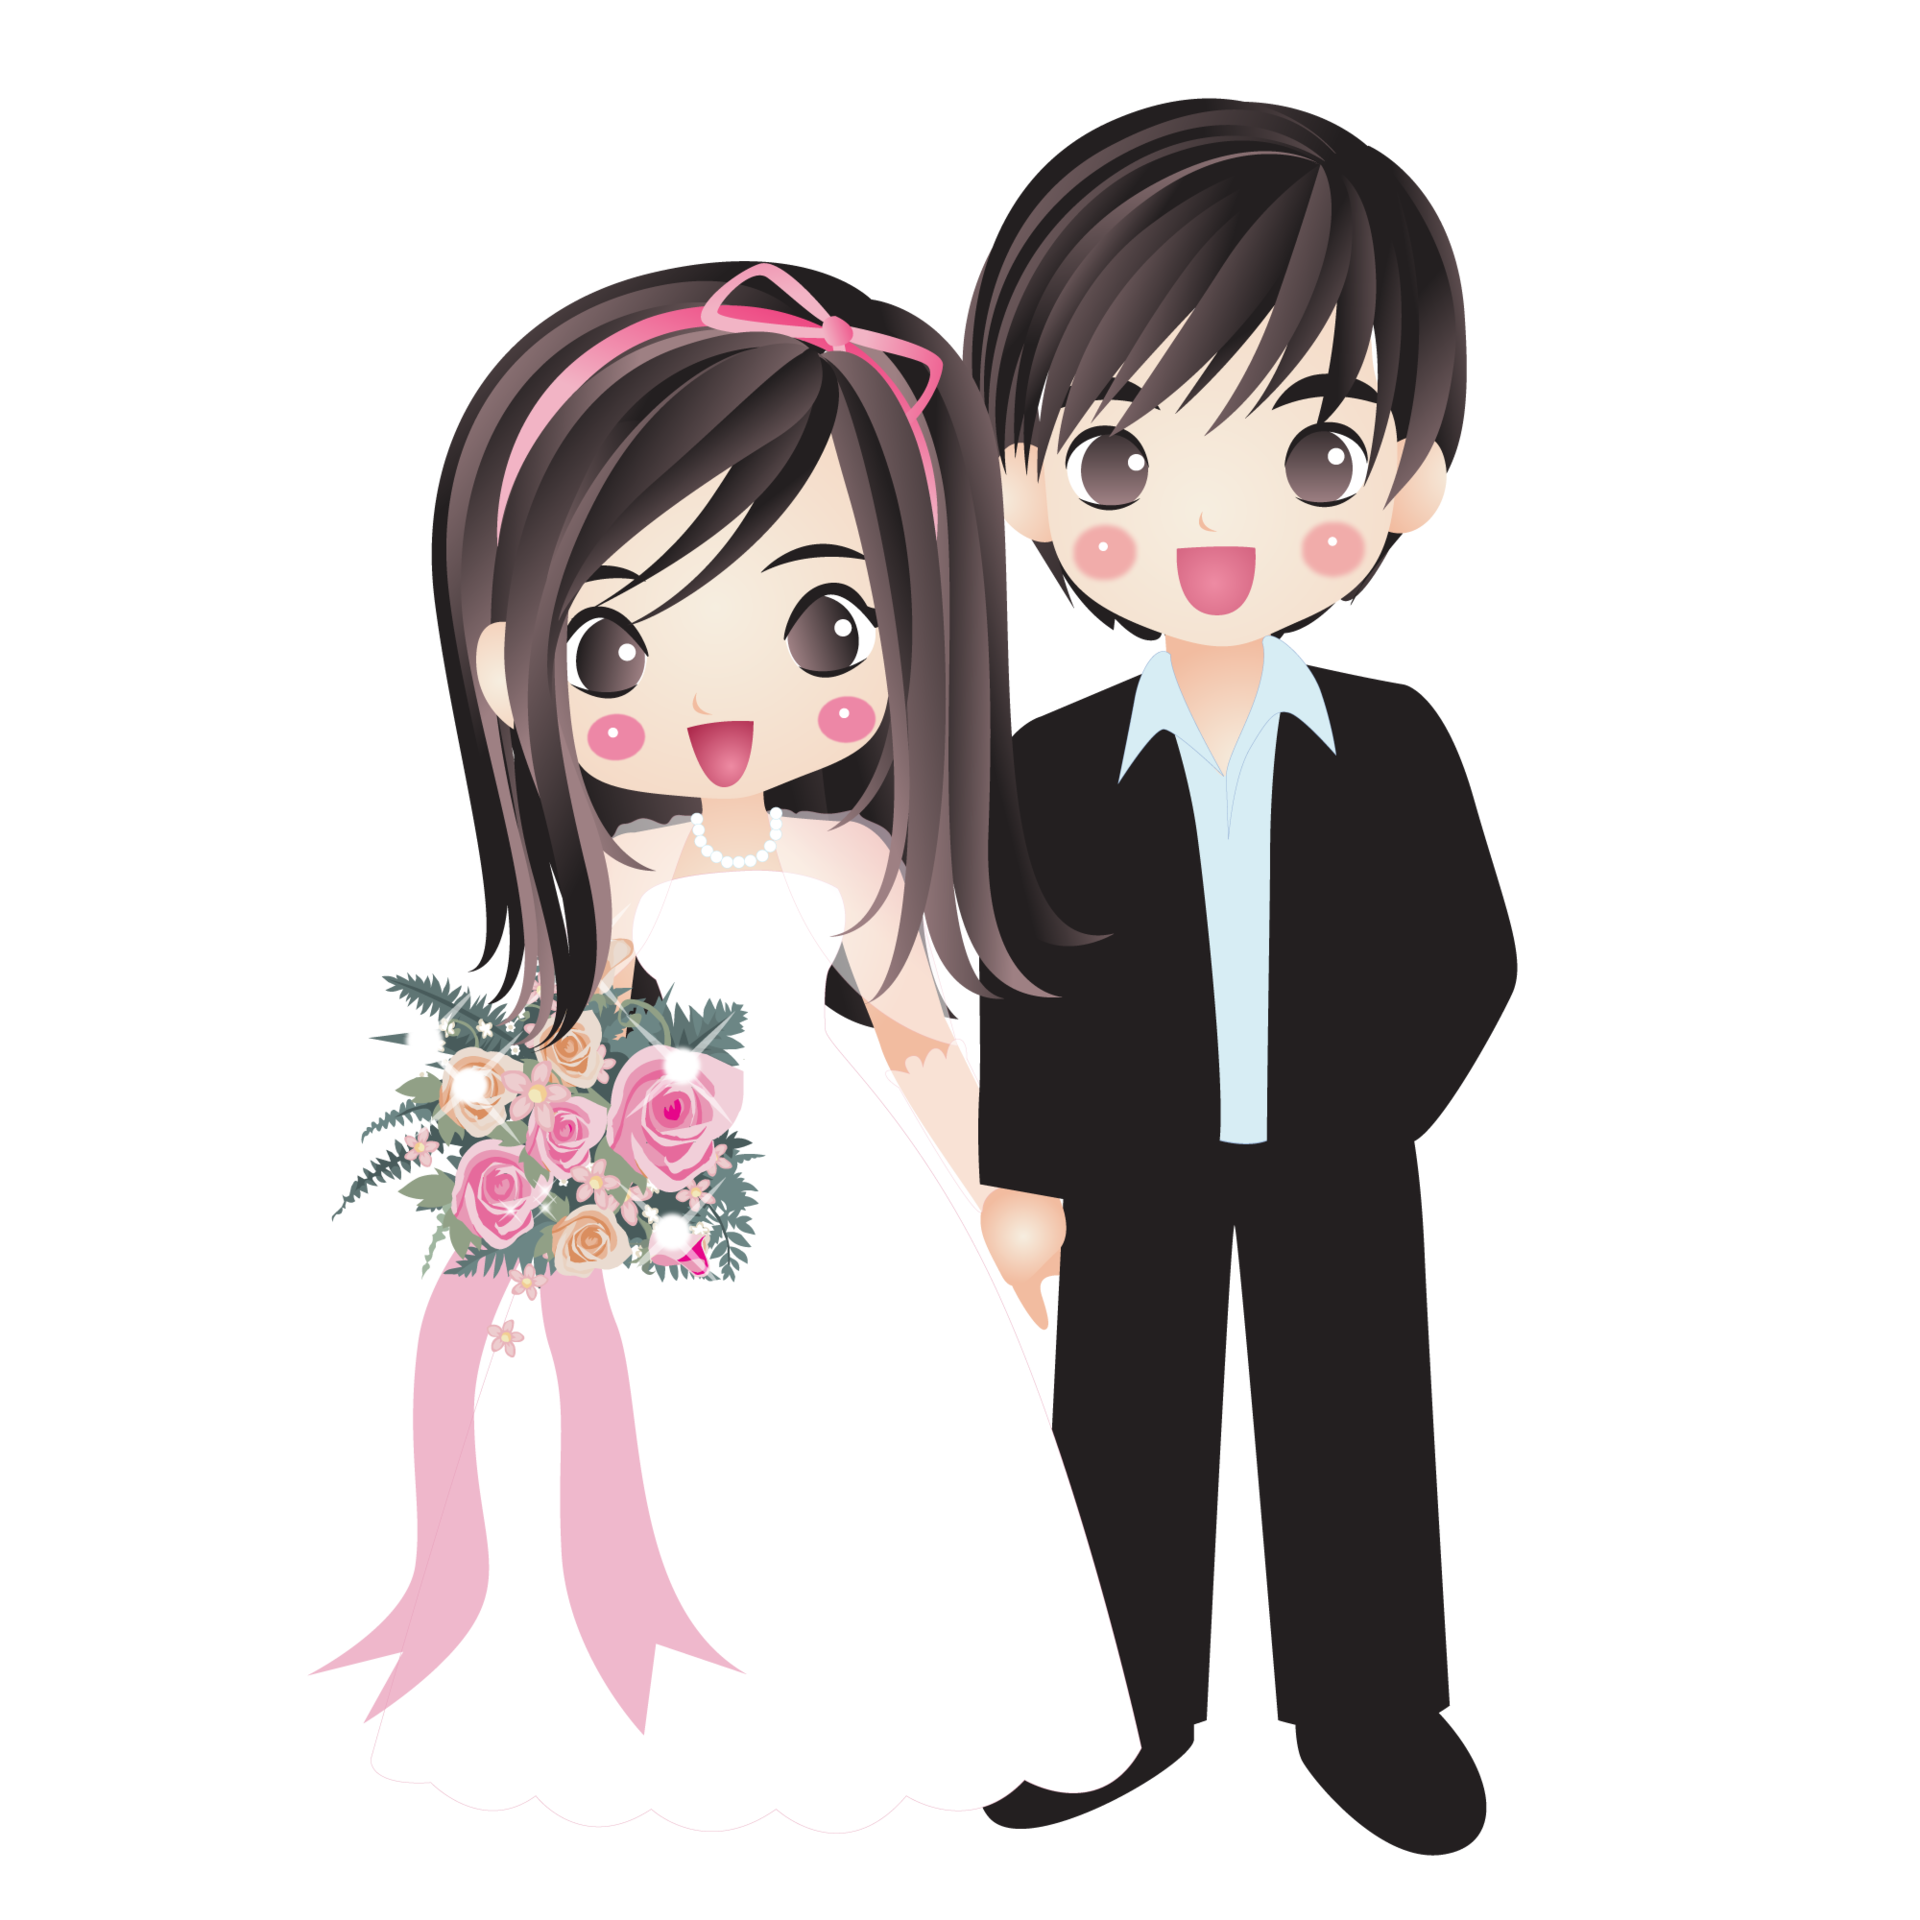 Wedding Day Bliss: Anime Boy and Girl in Bridal Suits | Amazon.com.br-demhanvico.com.vn